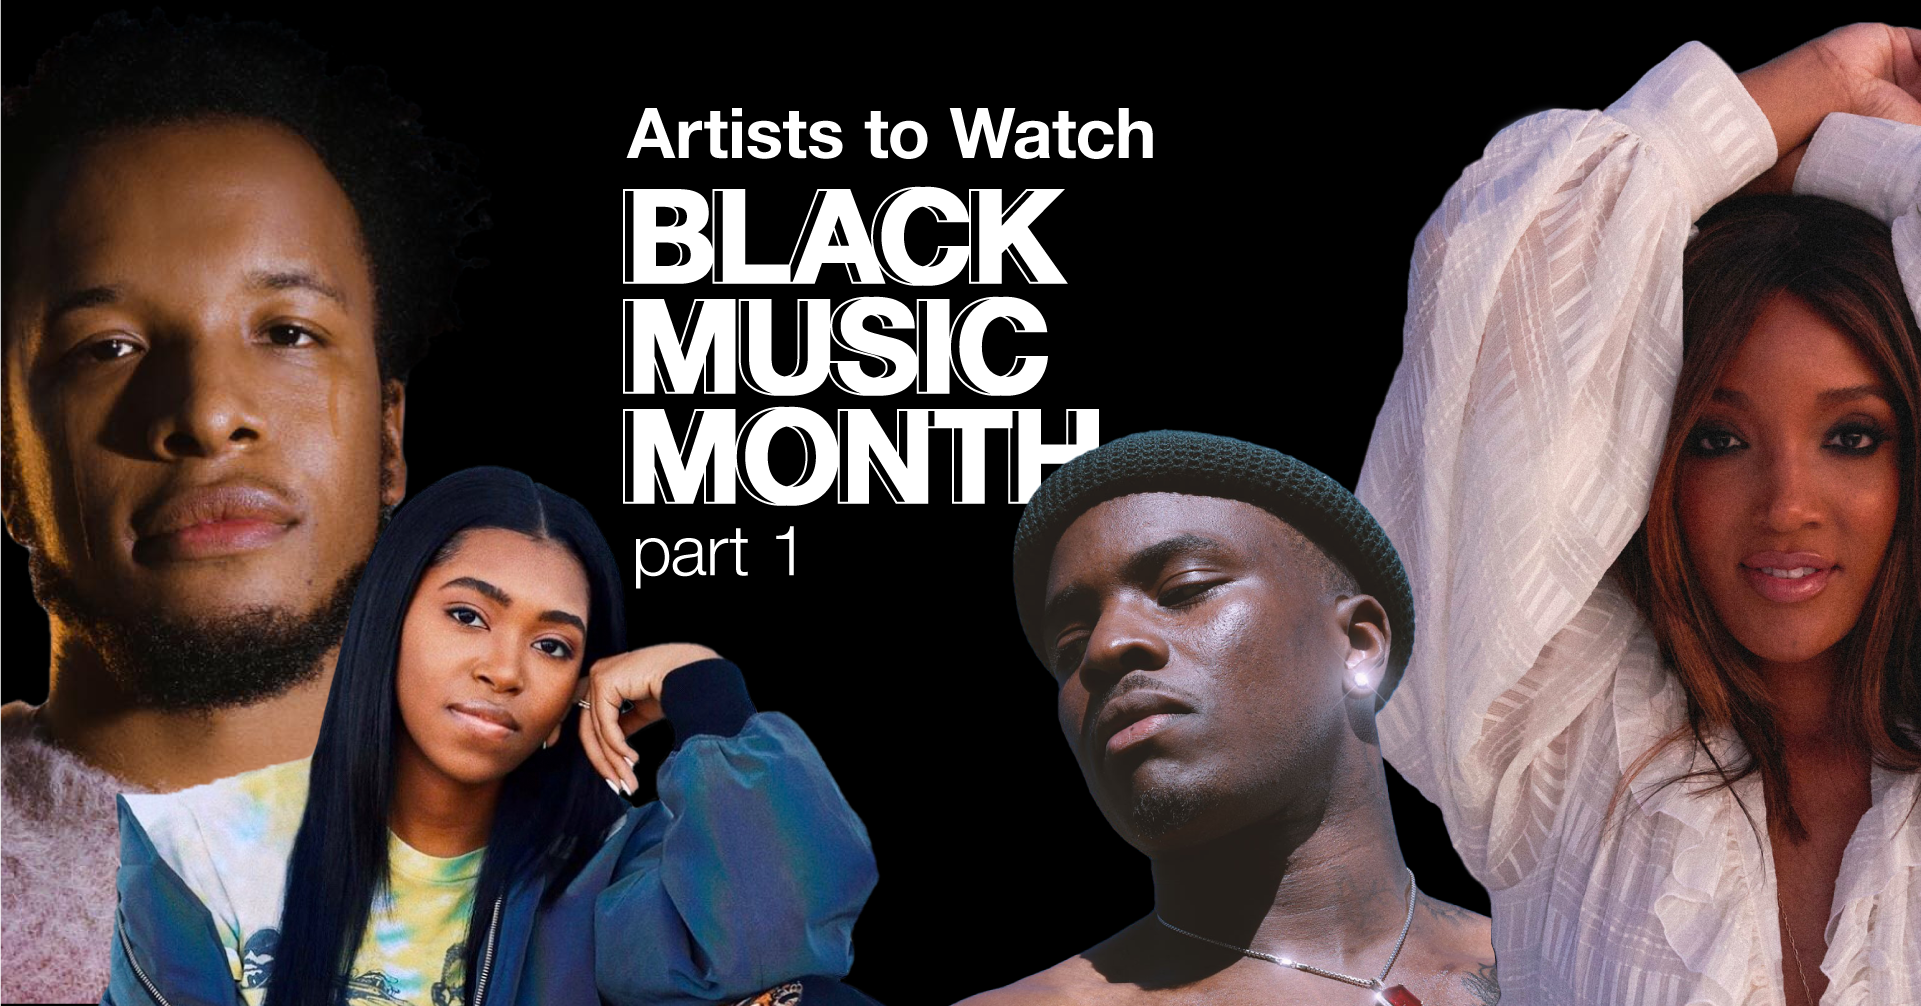 Artists to Watch: Black Music Month - Part 1